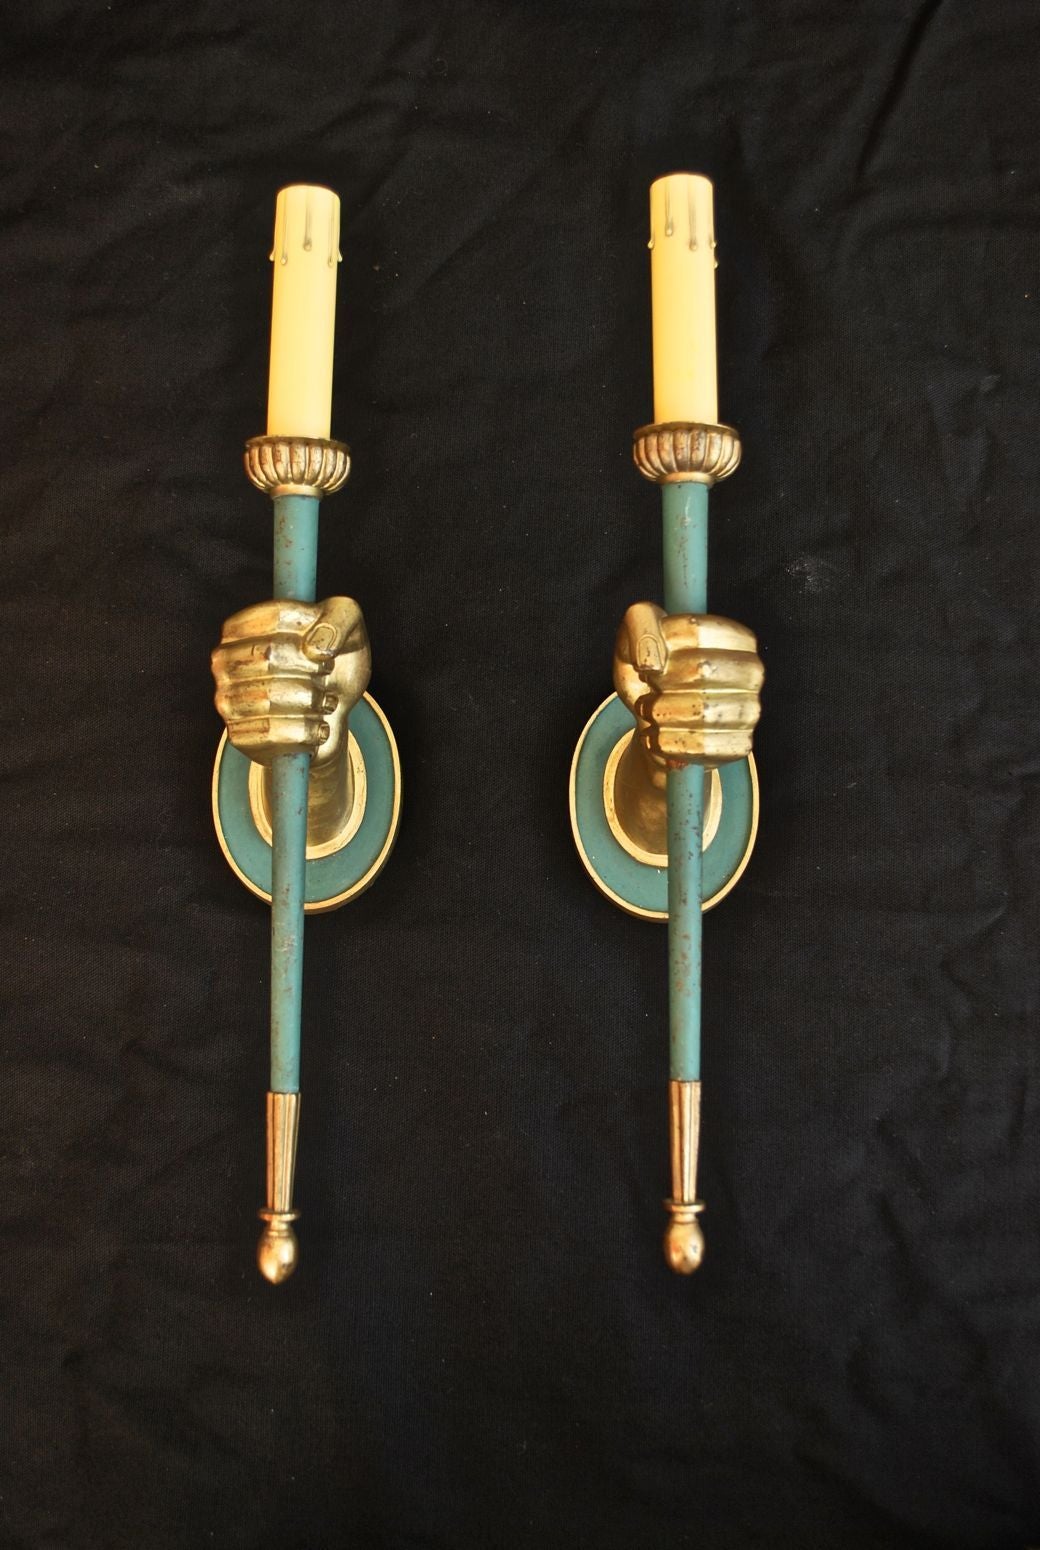 European Antique Pair of French Solid Bronze Hands Sconces, Possibly Andre Arbus